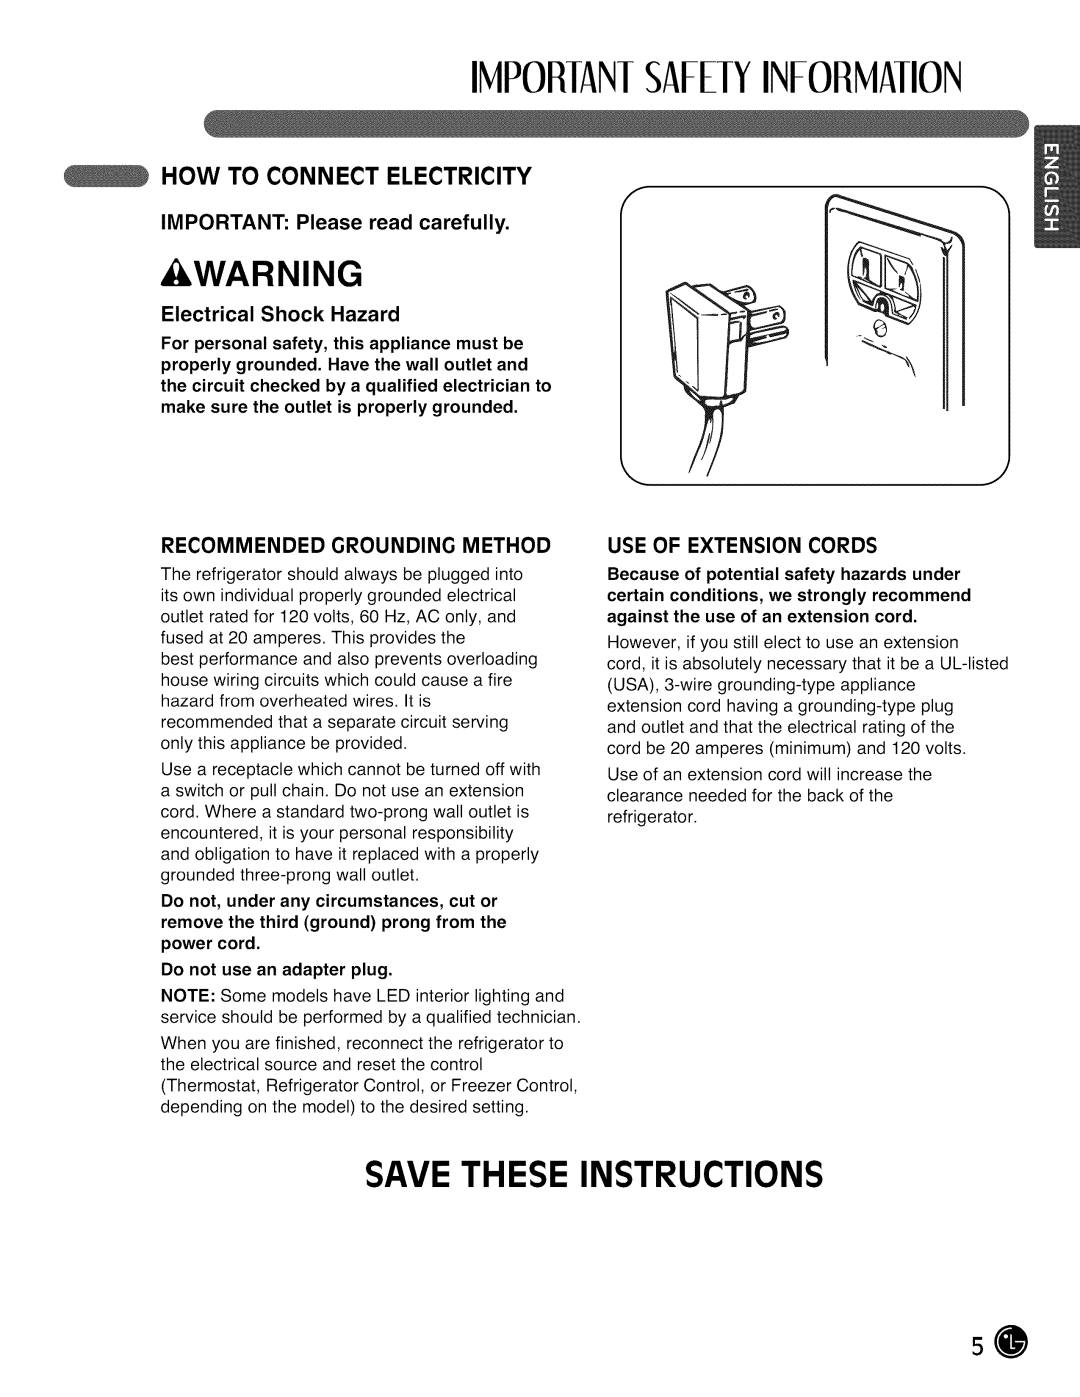 LG Electronics LMX28988 Save These Instructions, How To Connect Electricity, IMPORTANT: Please read carefully, Warning 